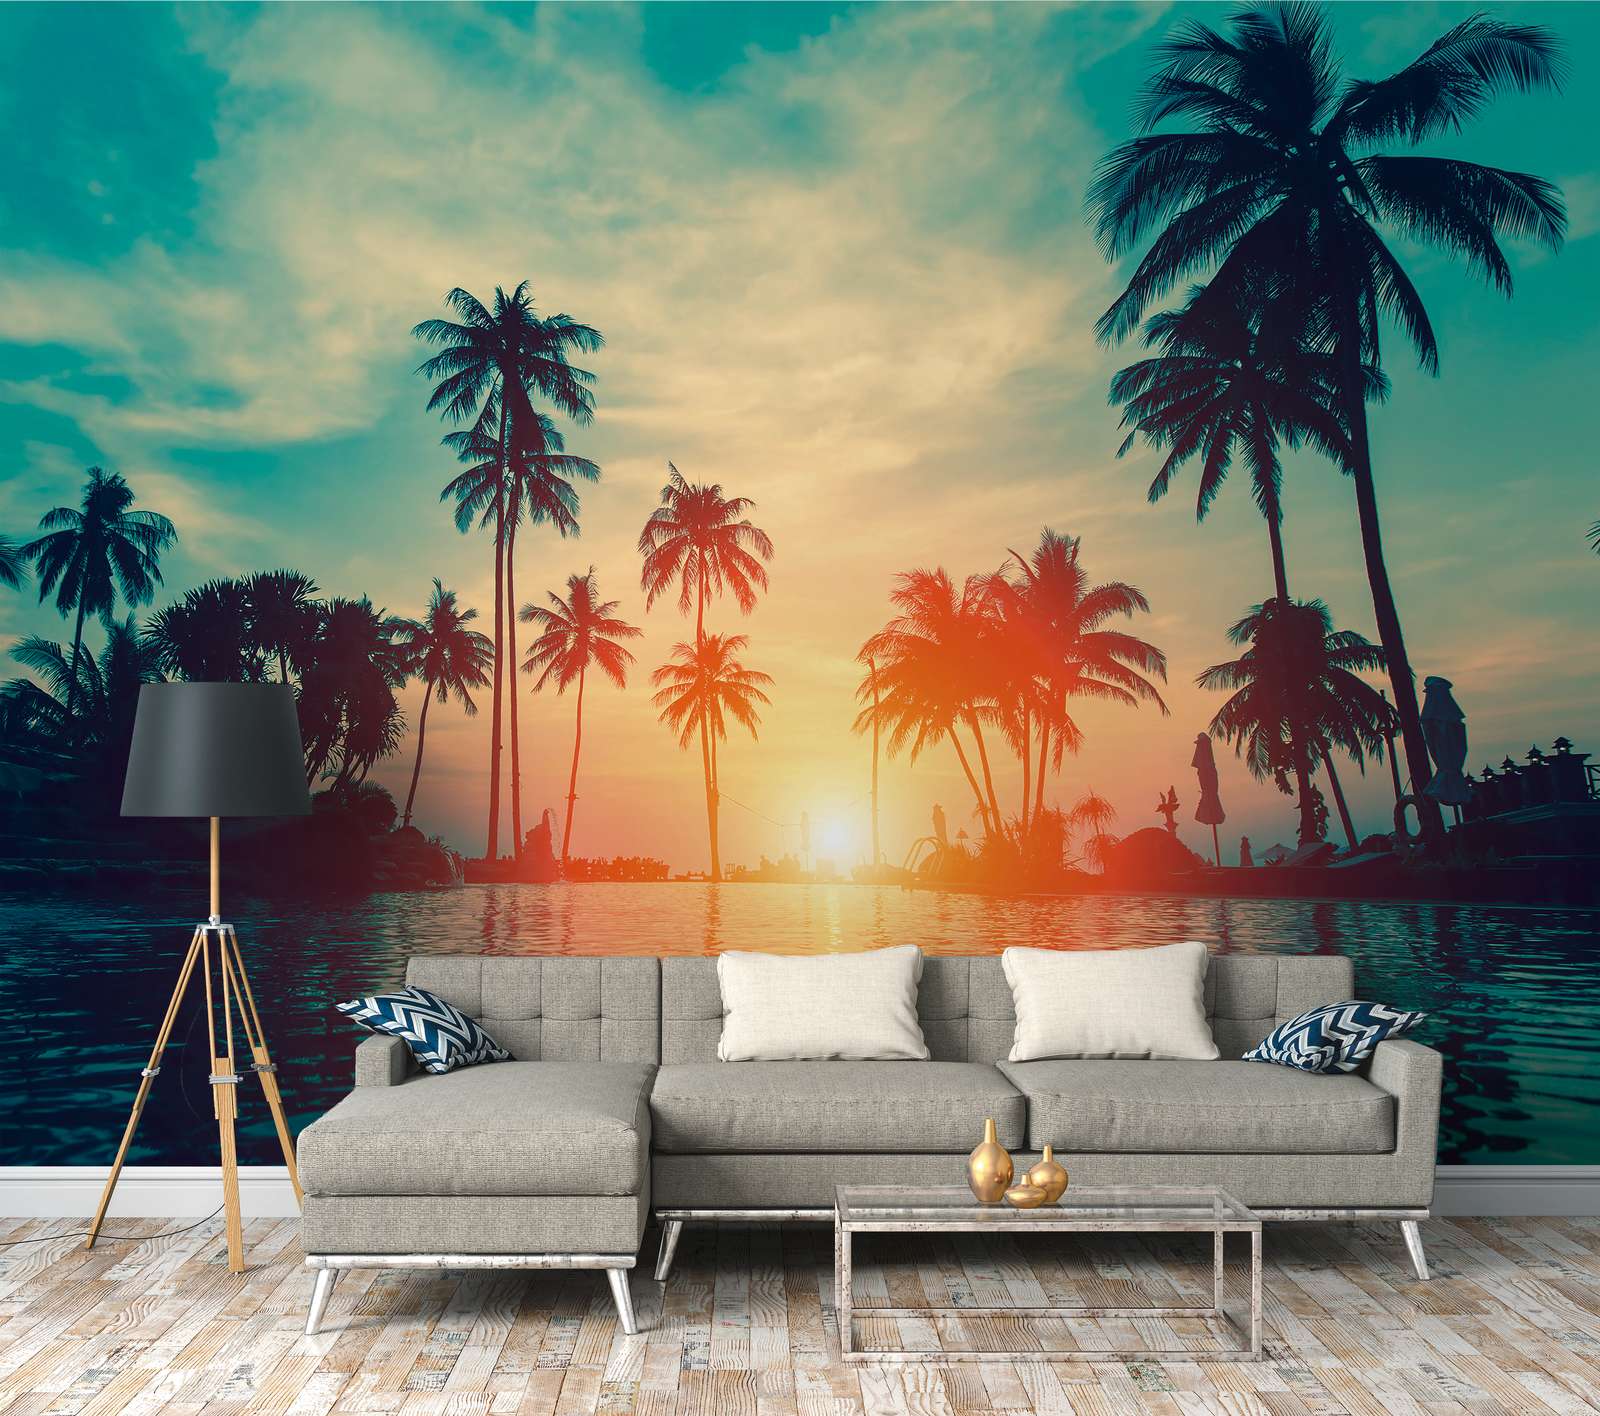             Photo wallpaper with palm trees on the water in the sunset - blue, orange, black
        